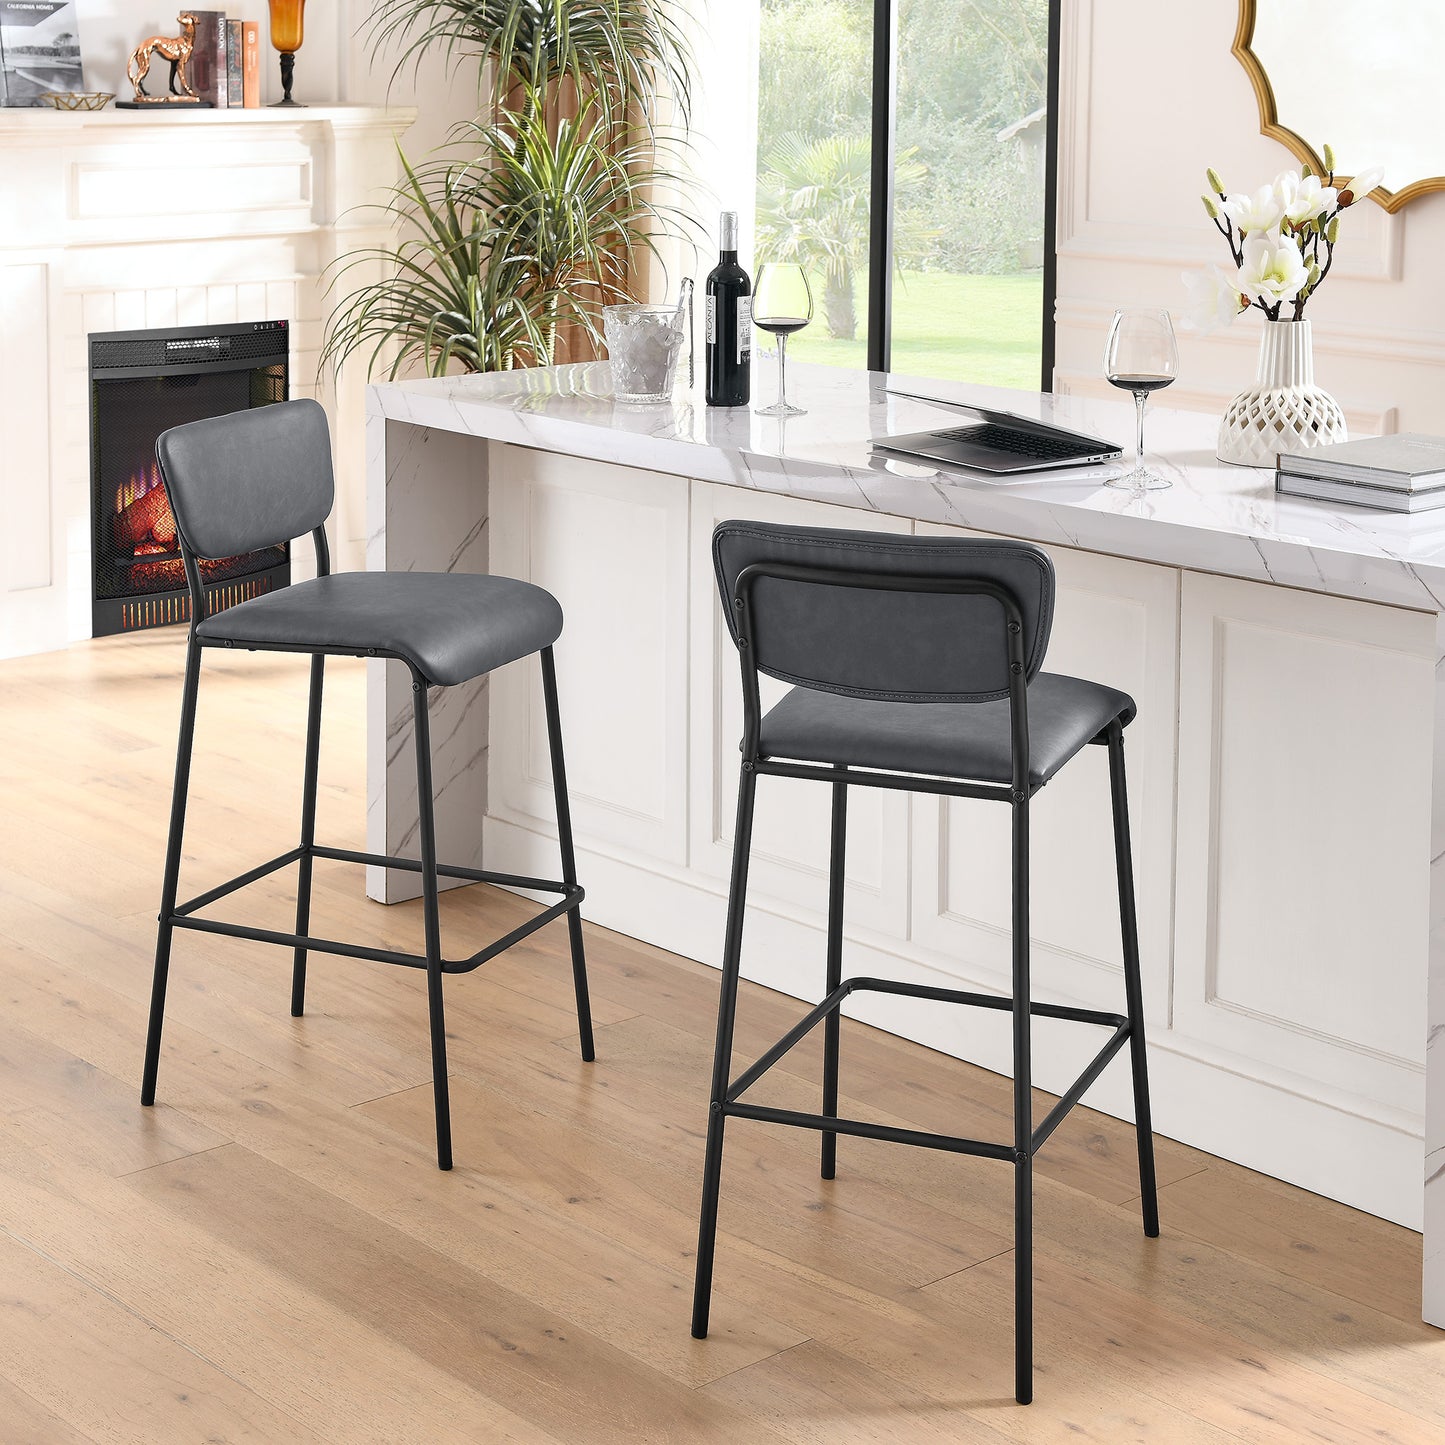 Pu Faux Leather Bar Stools Set of 2, Pub Barstools with Back and Footrest, Grey (18.25"x20“x38.5”）